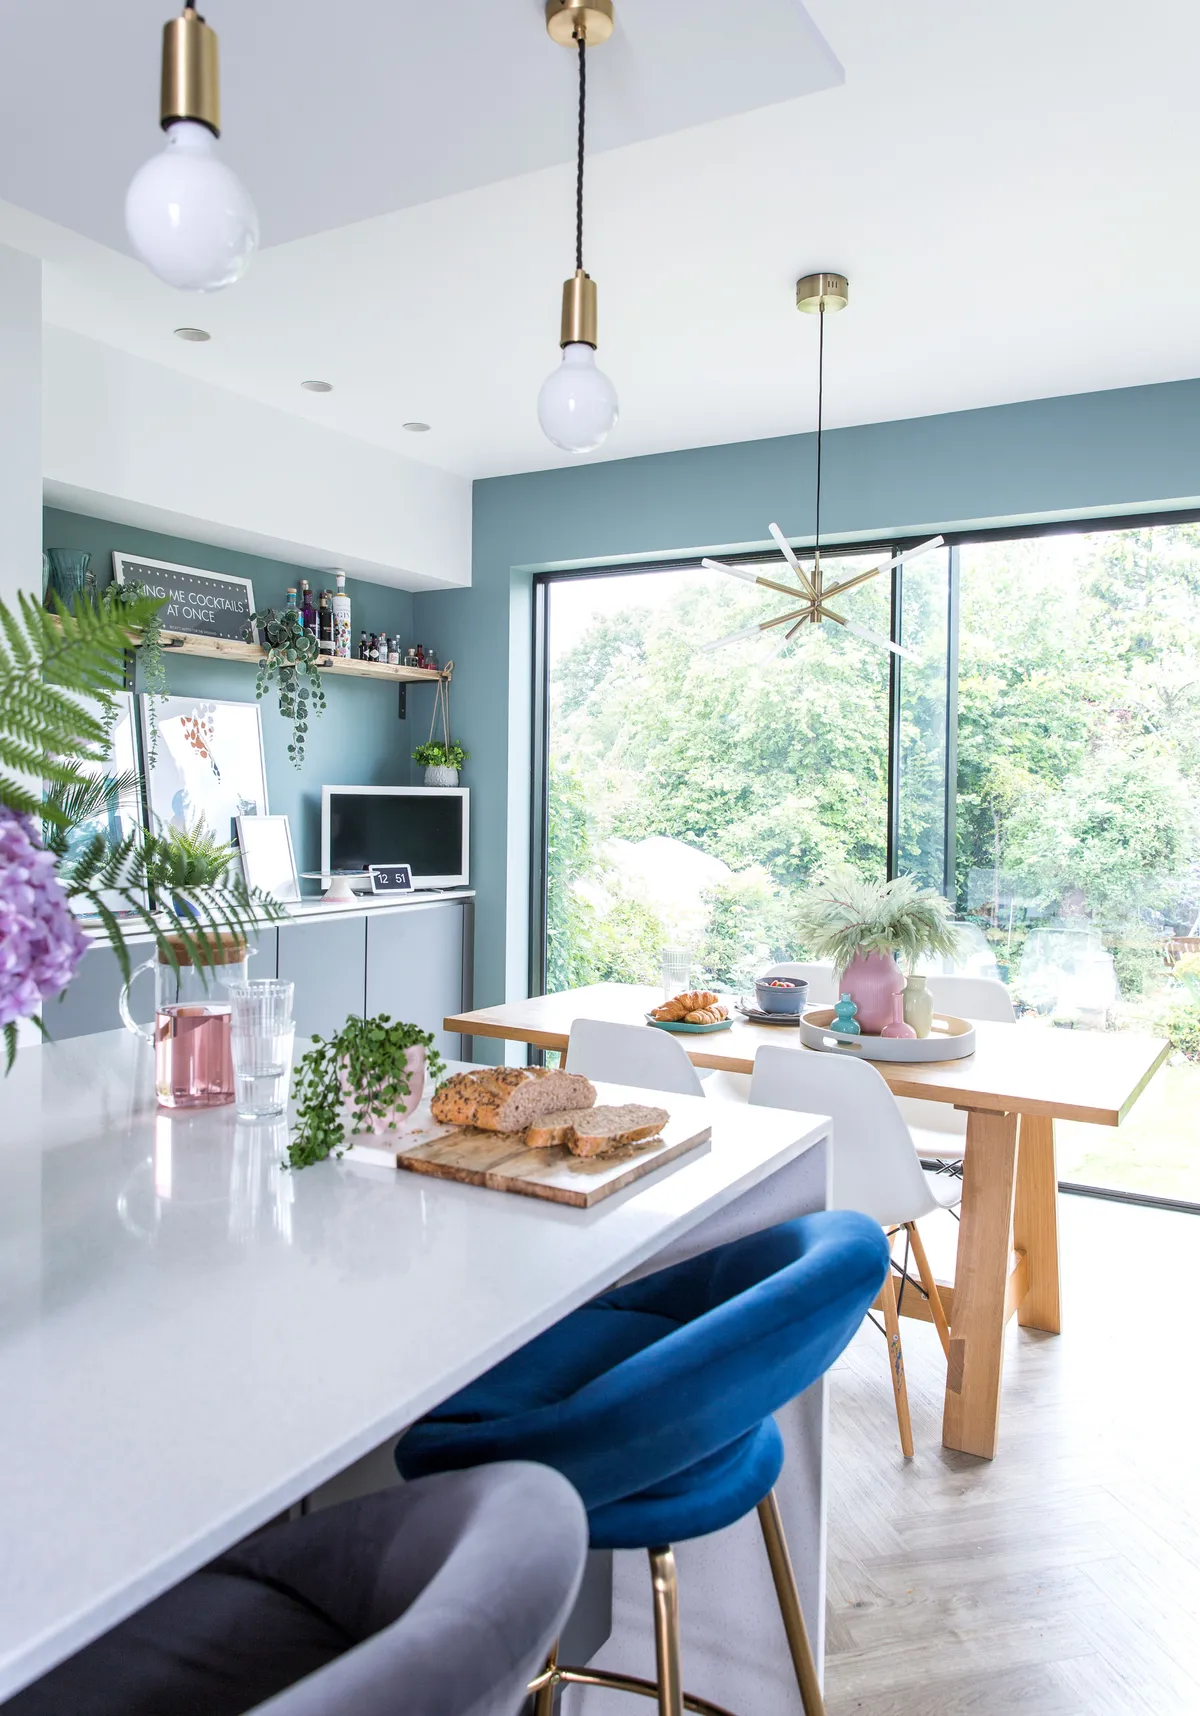 Good idea! Choose different coloured doors to add interest to a simplistic kitchen design